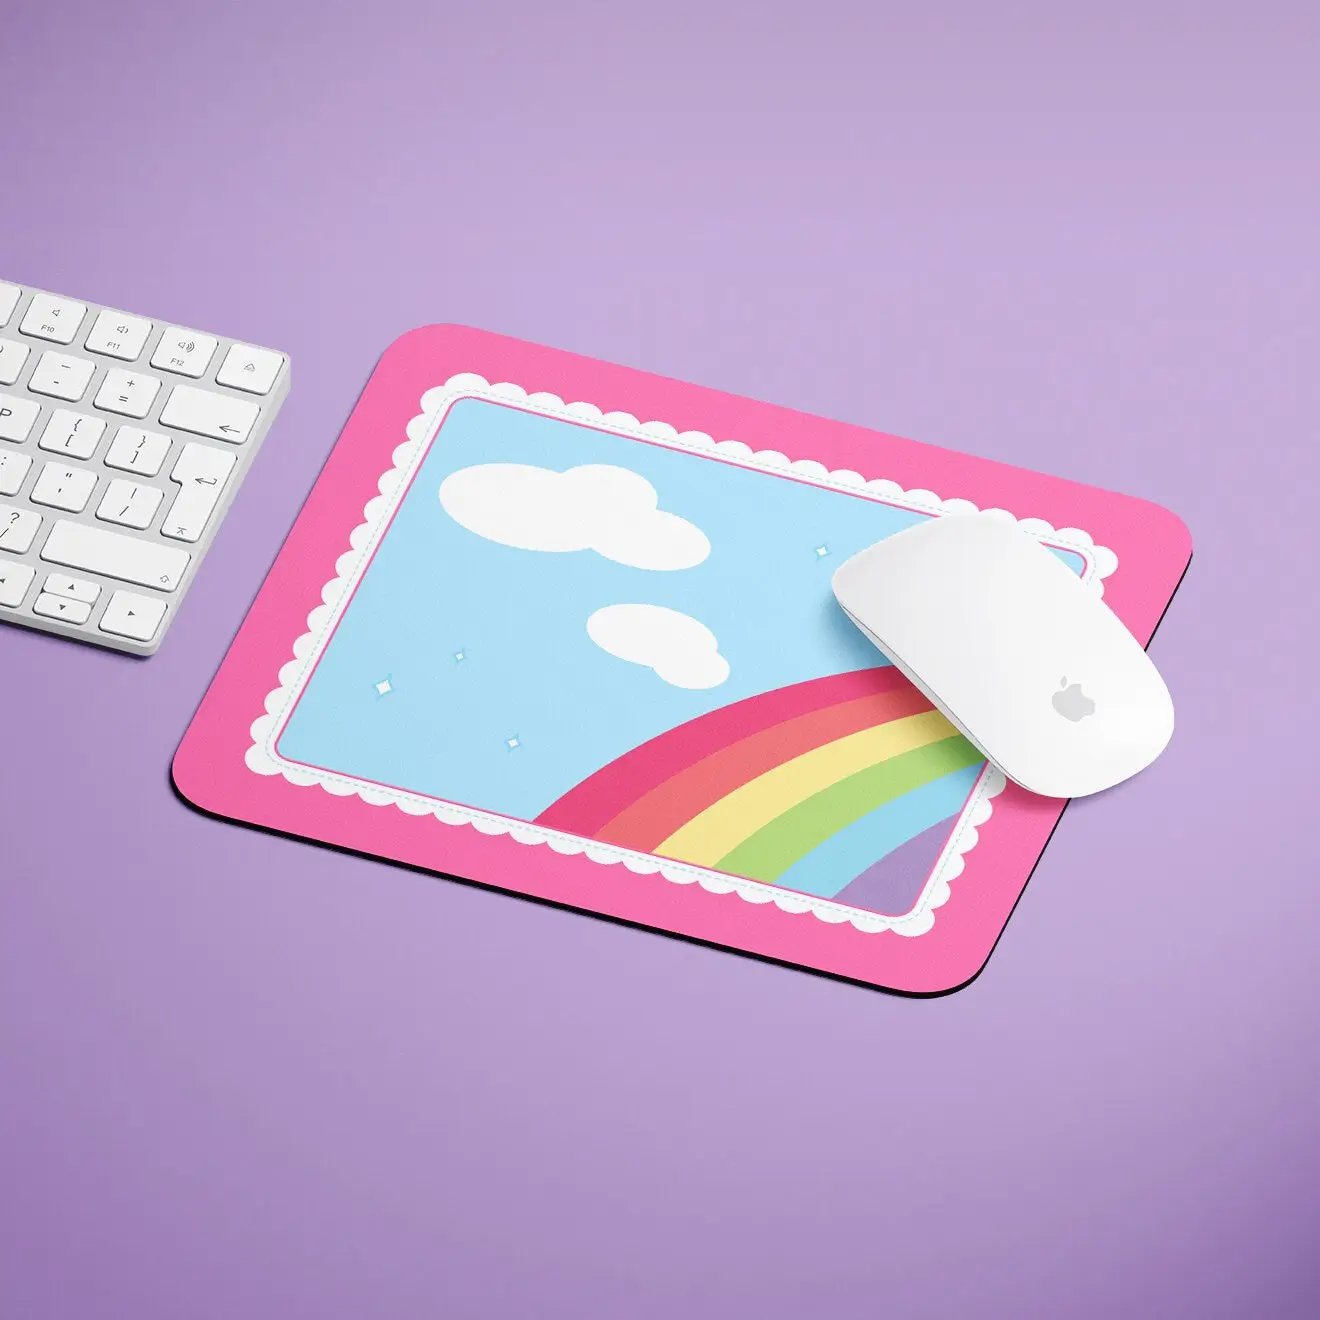 a mouse pad with a picture of a rainbow on it